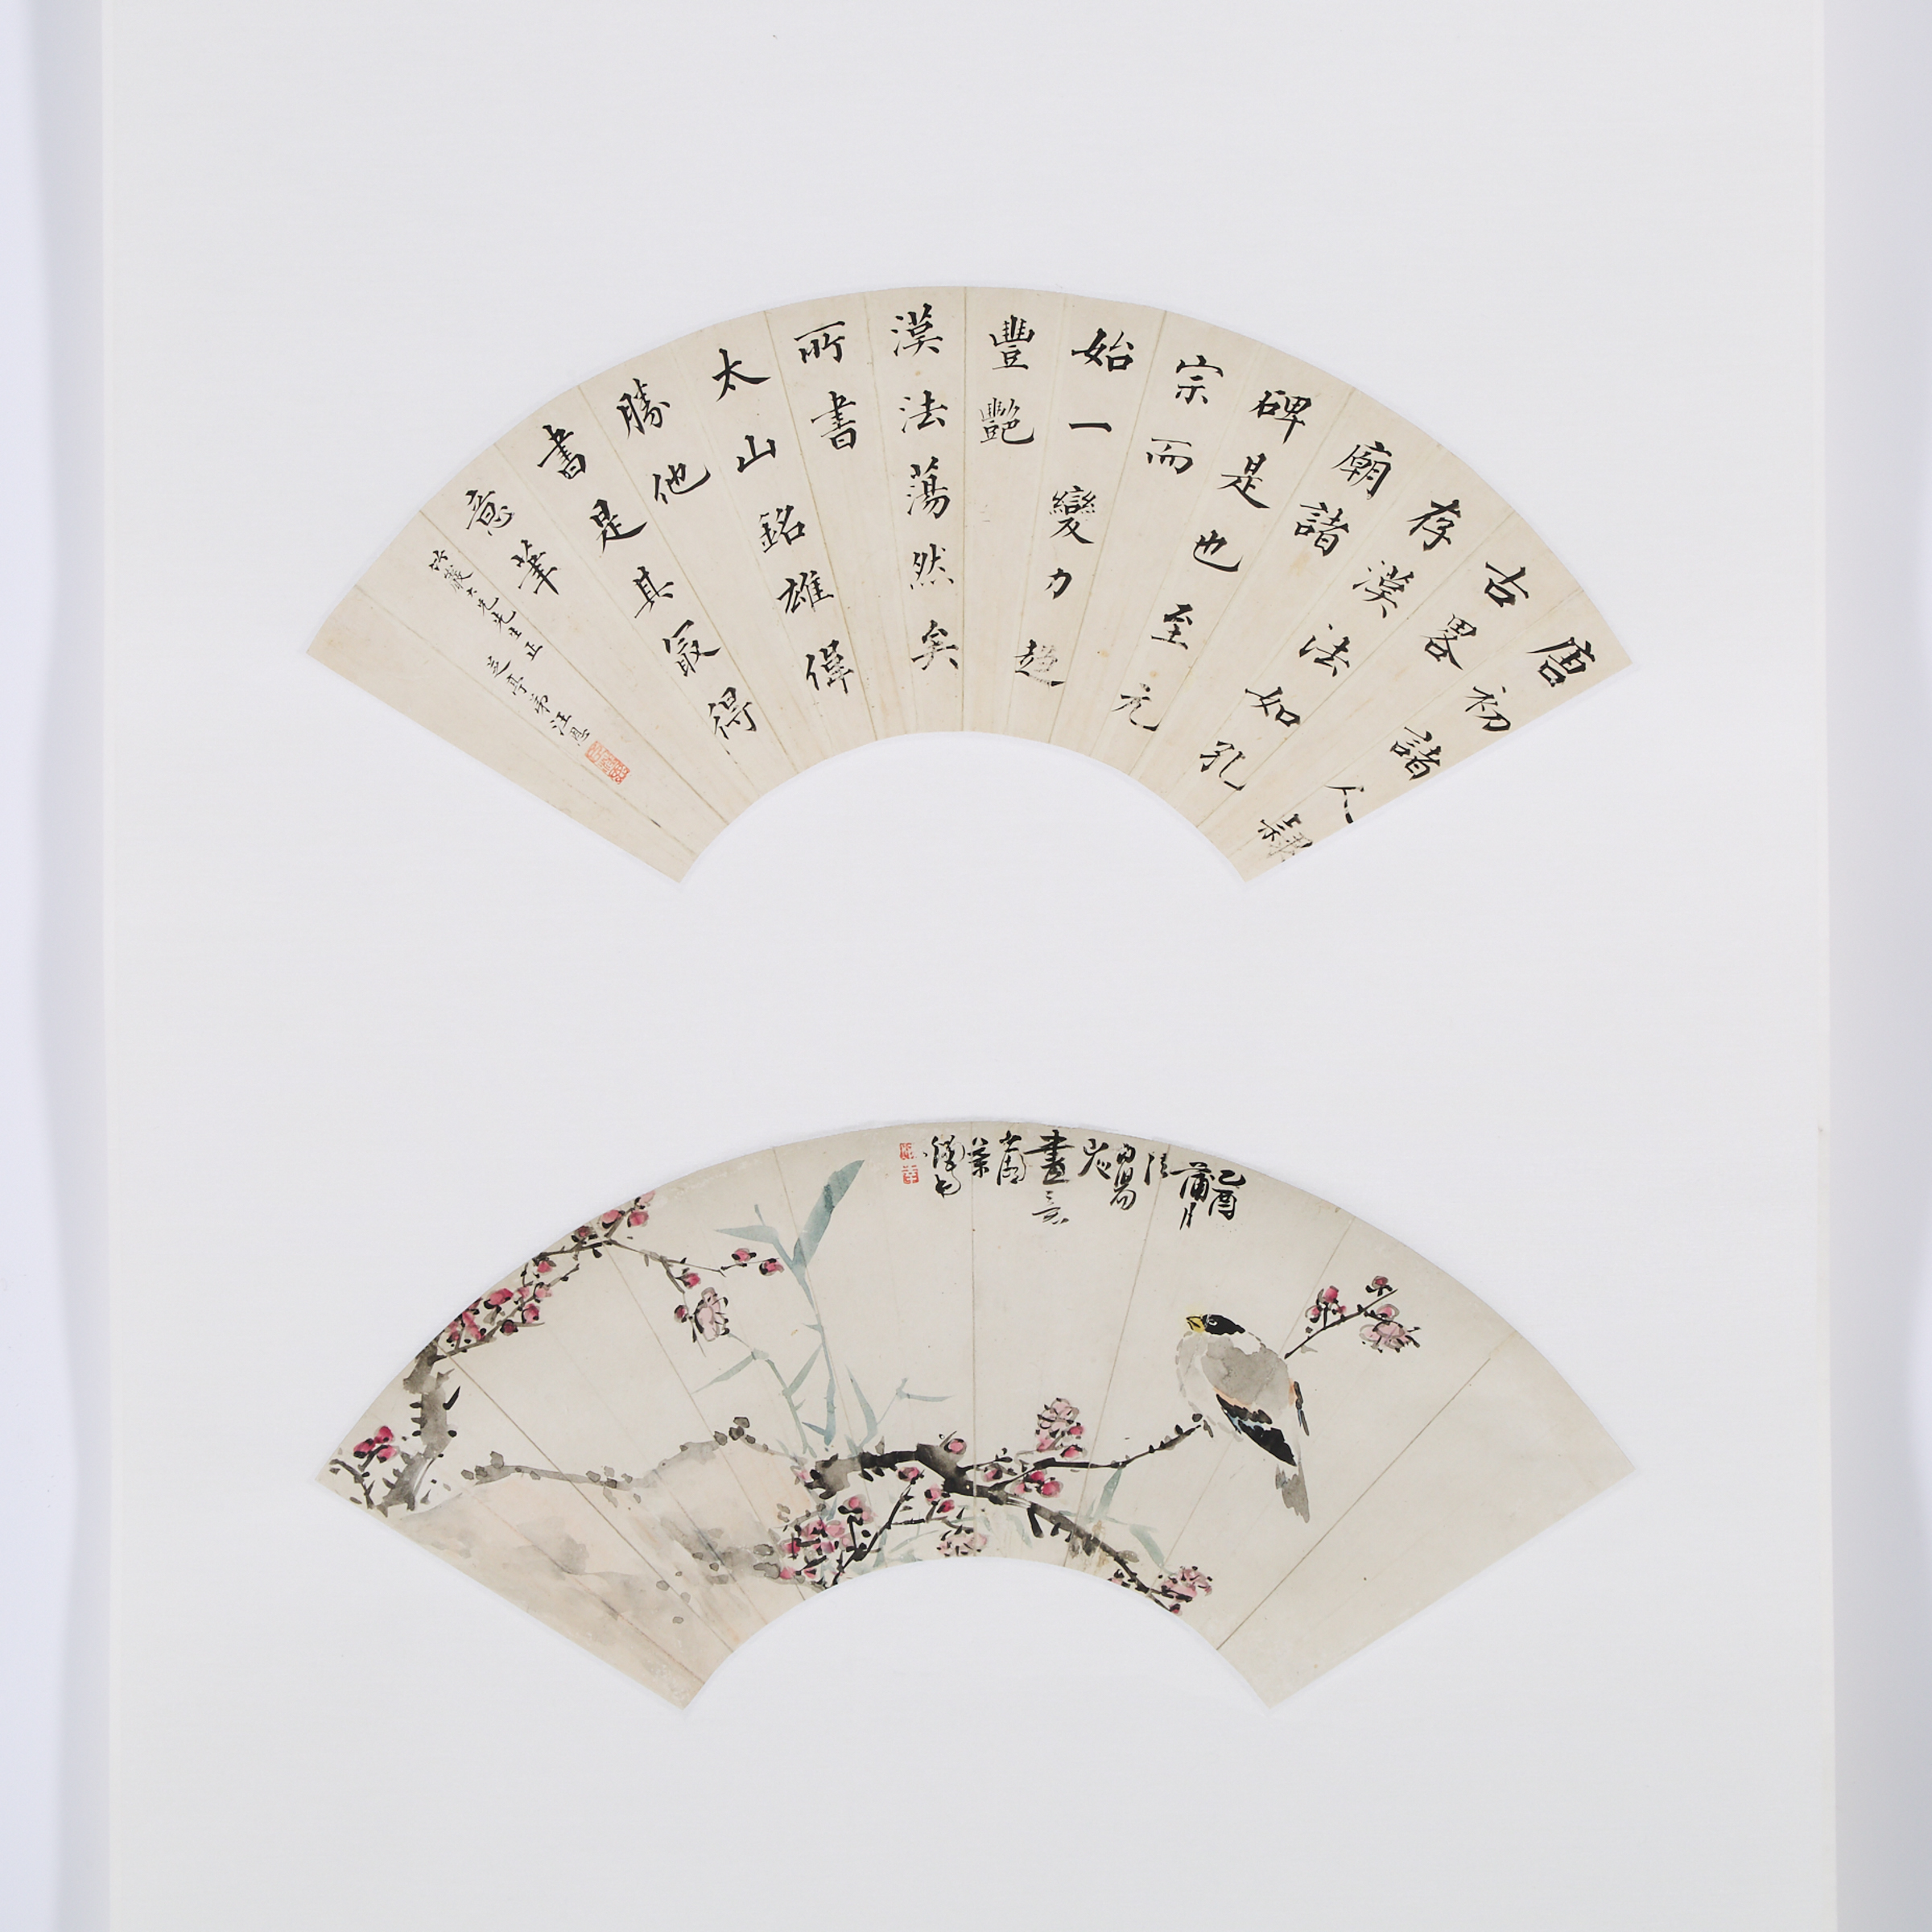 Two Fan Paintings of Birds and Flowers and Calligraphy, Republican Period